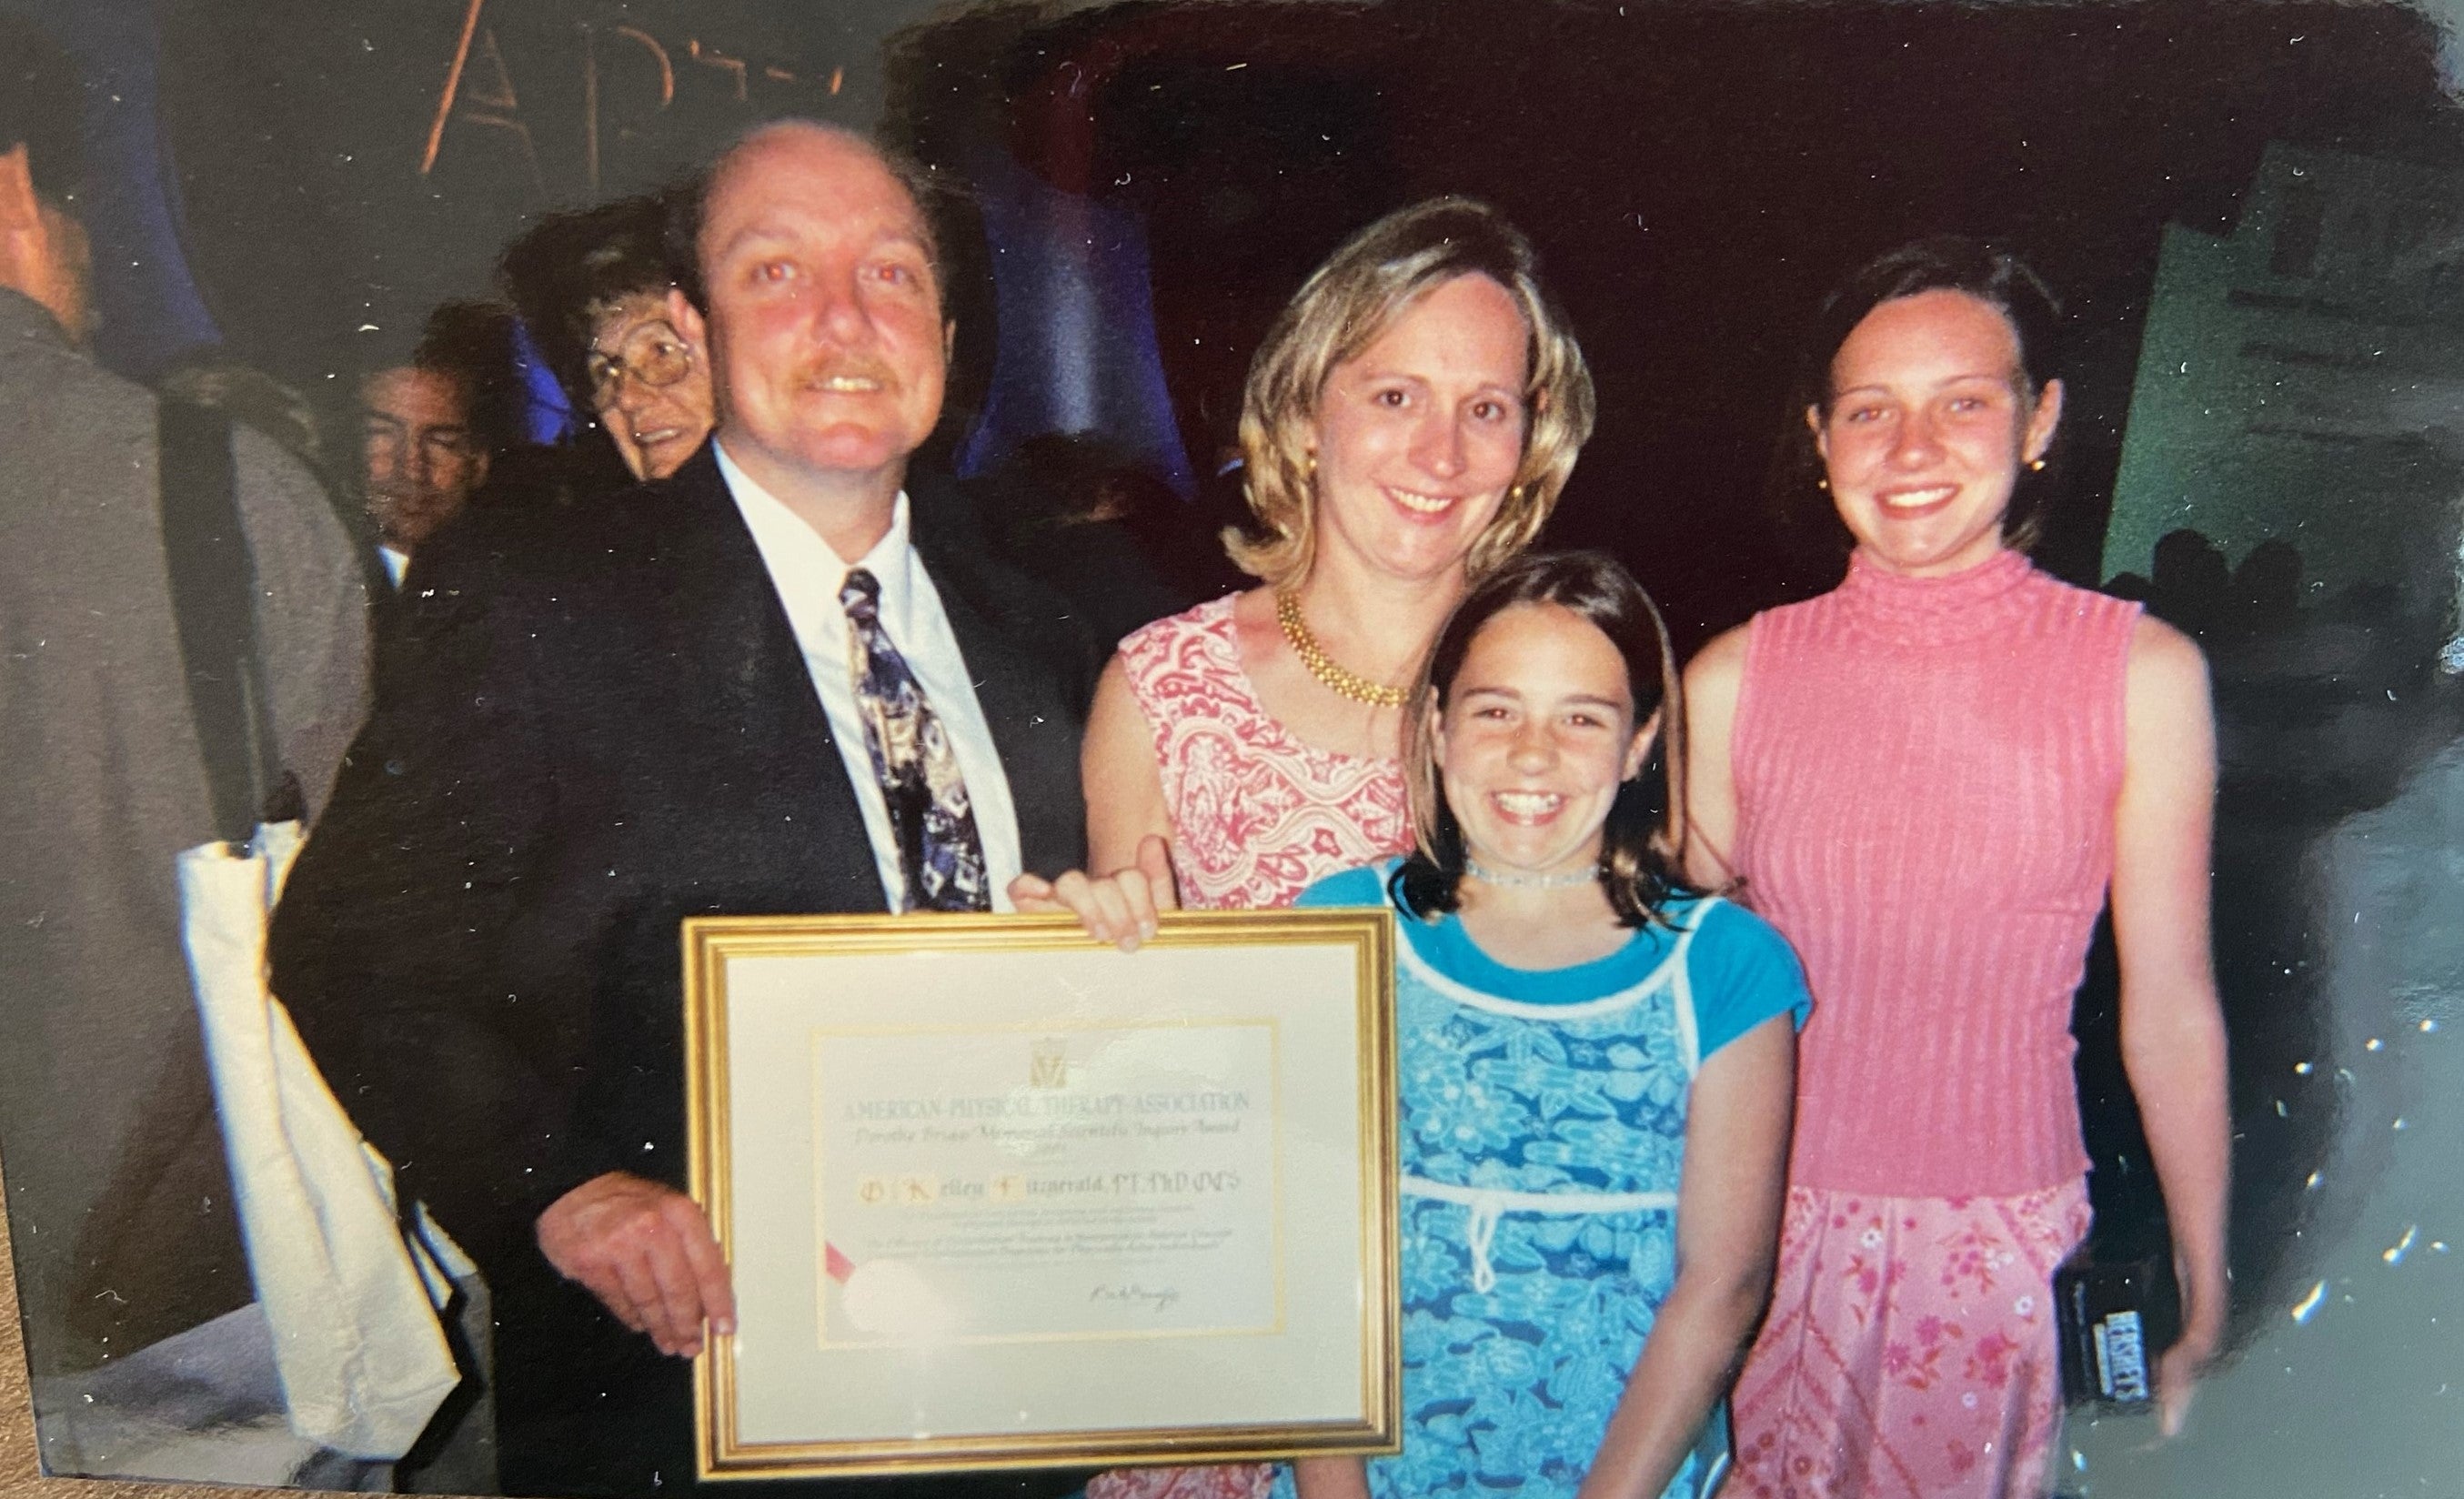 Fitzgerald with his young family as he received the Dorothy Briggs Memorial Scientific Inquiry Award at the national physical therapy association meeting